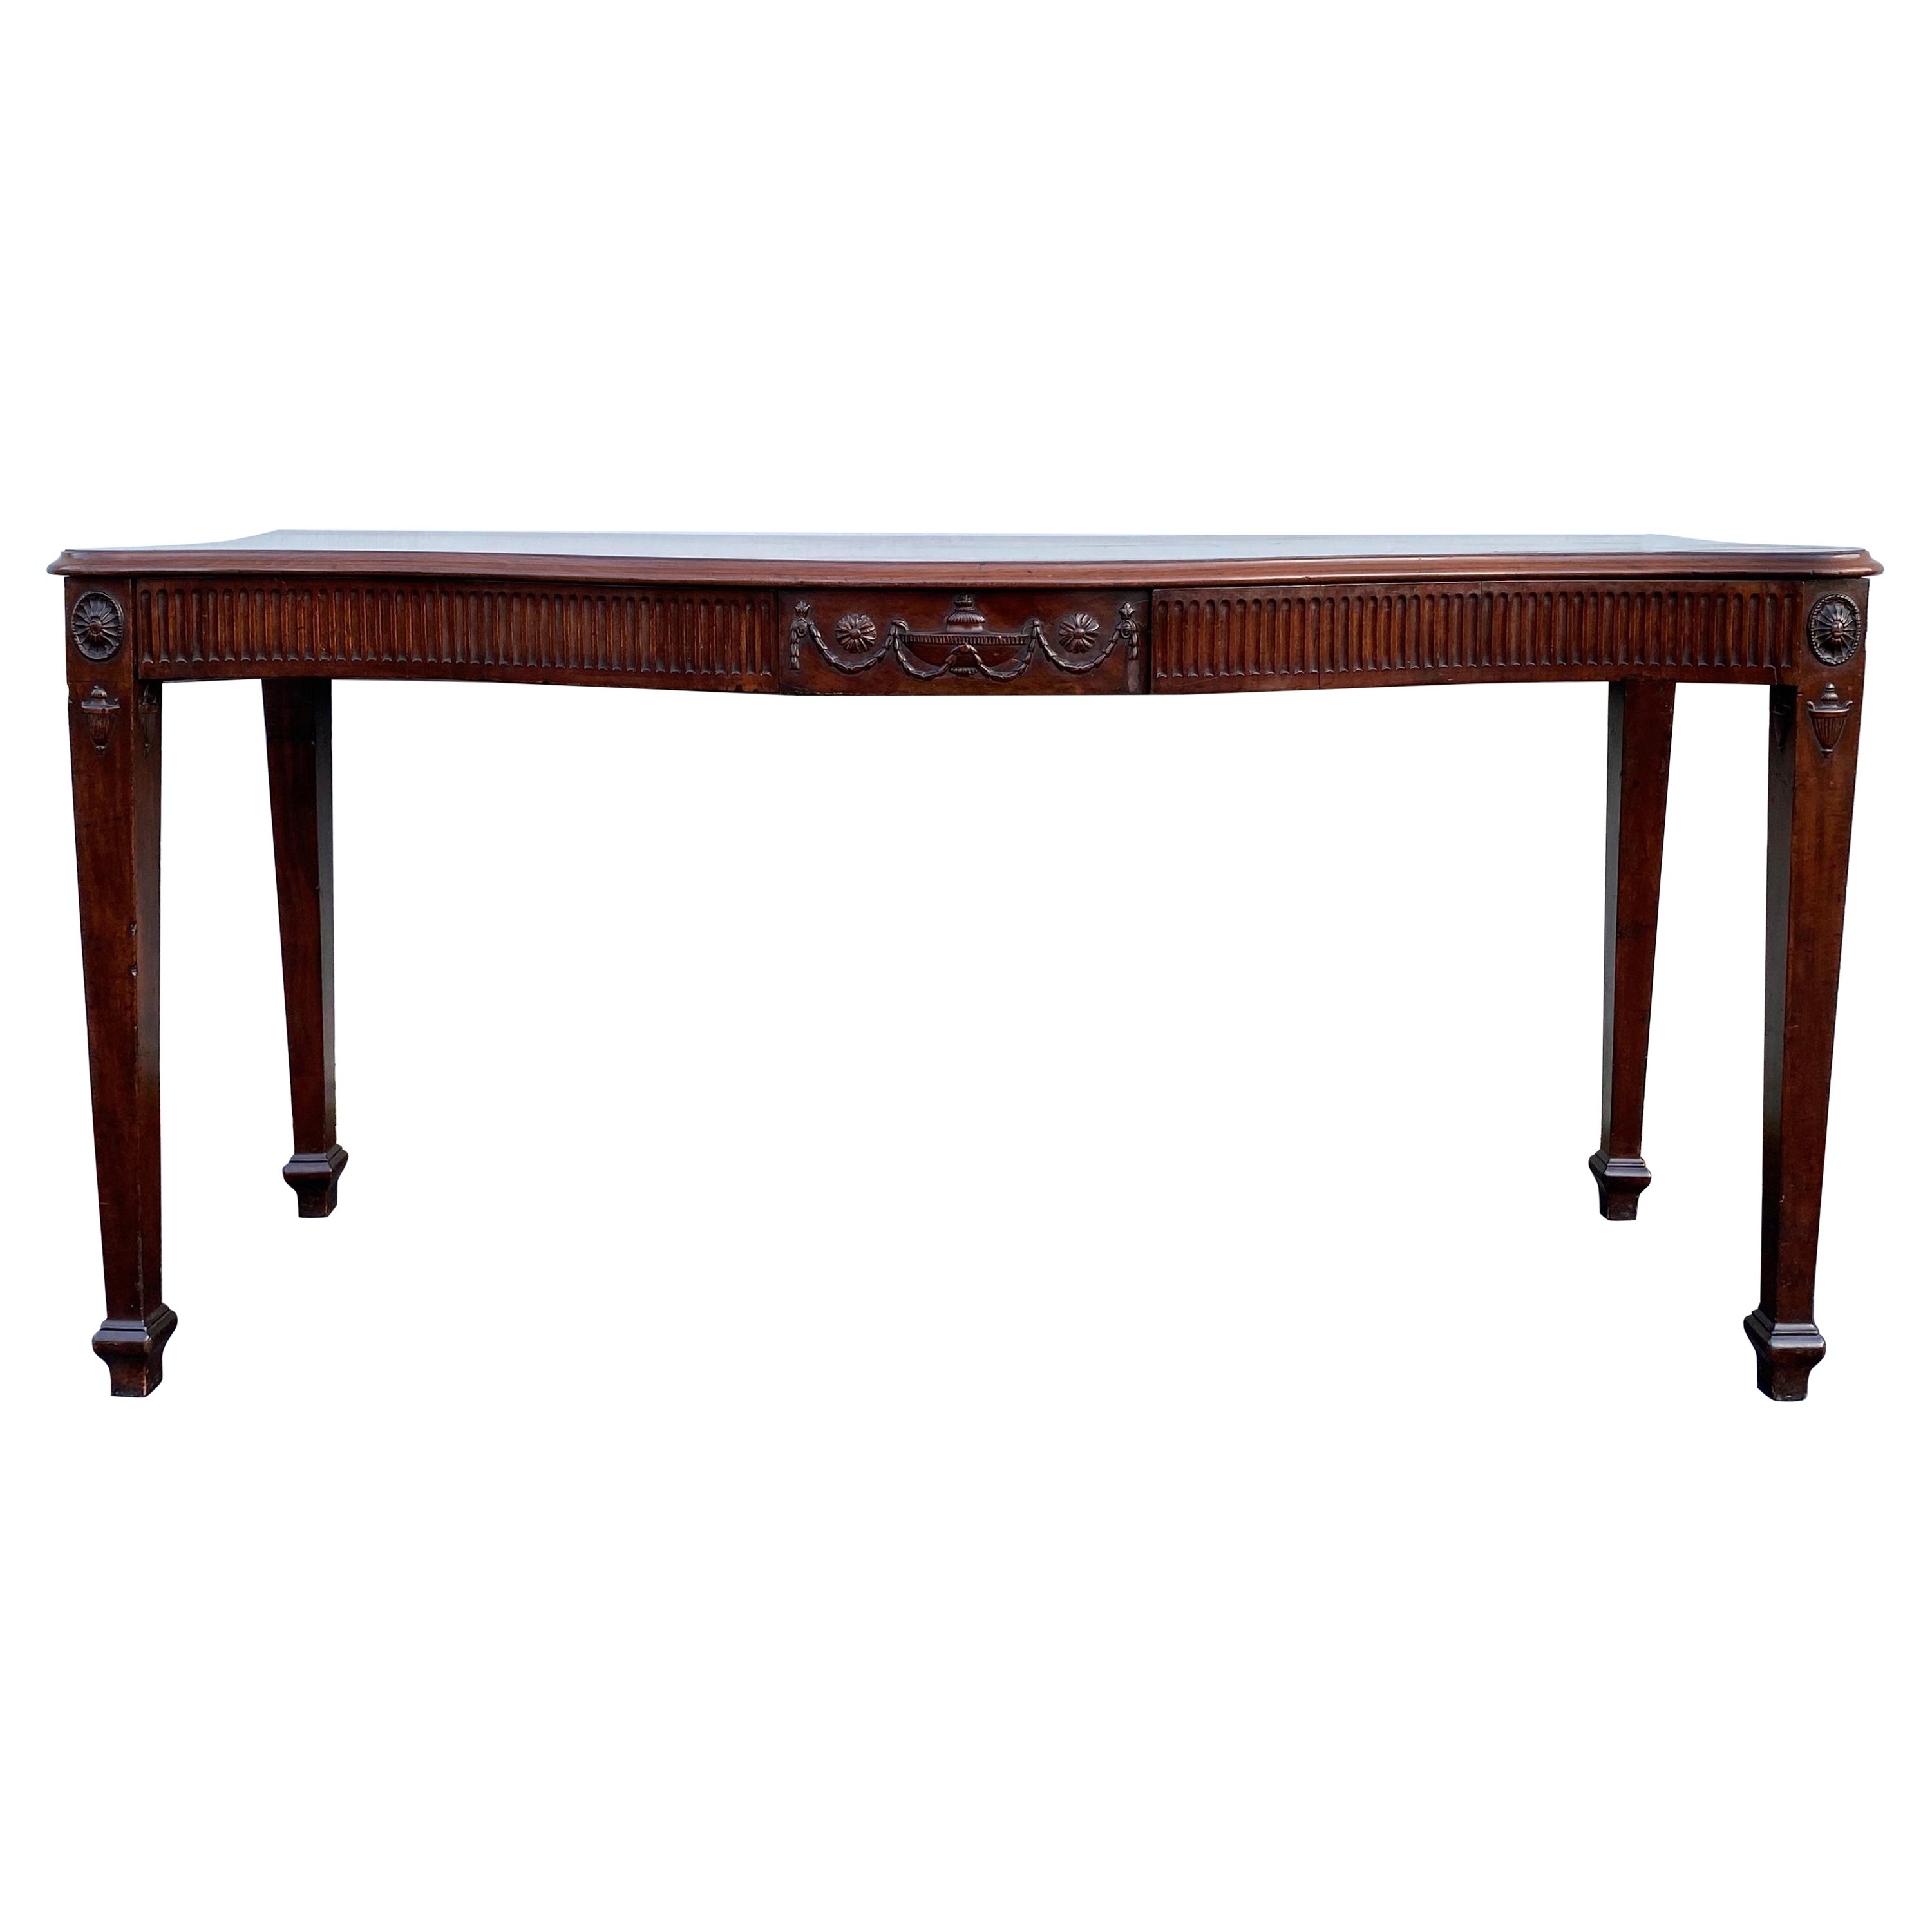 Georgian Mahogany Serpentine Two Drawer Sideboard, Serving or Console Table